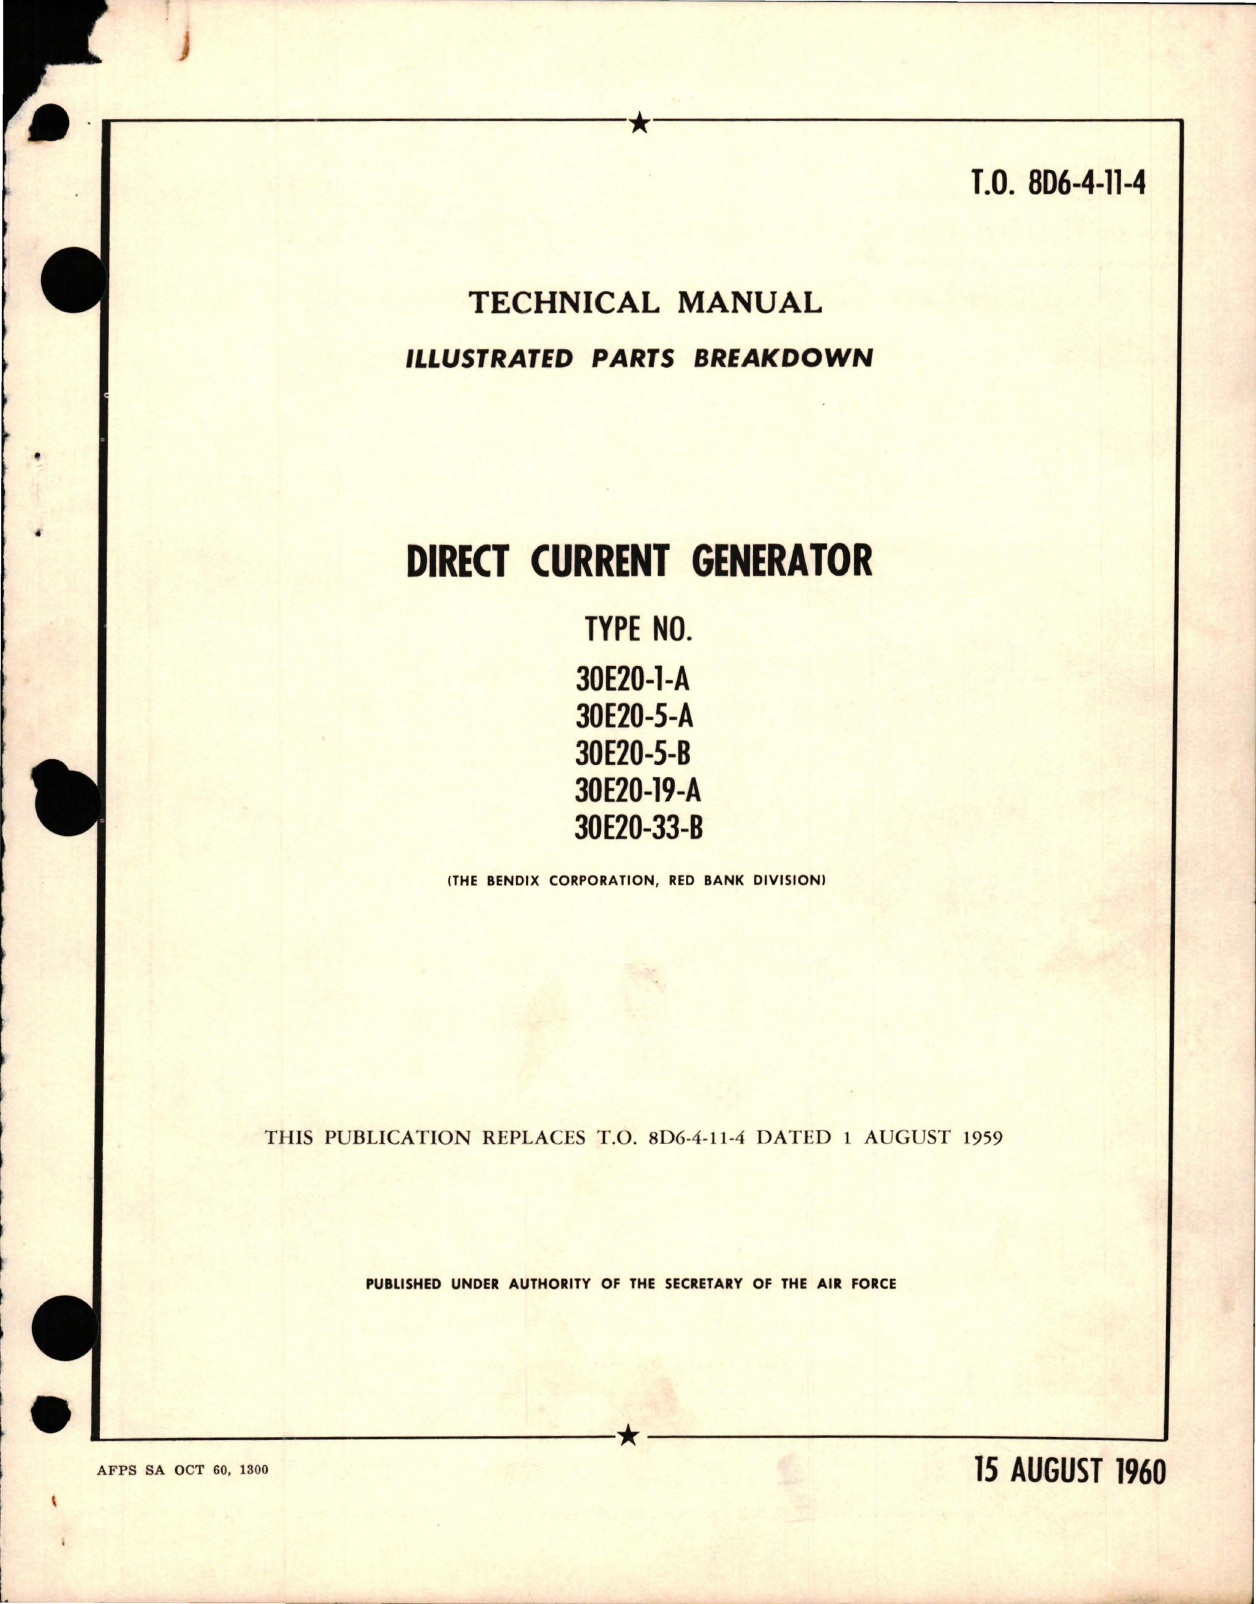 Sample page 1 from AirCorps Library document: Illustrated Parts Breakdown for Direct Current Generator